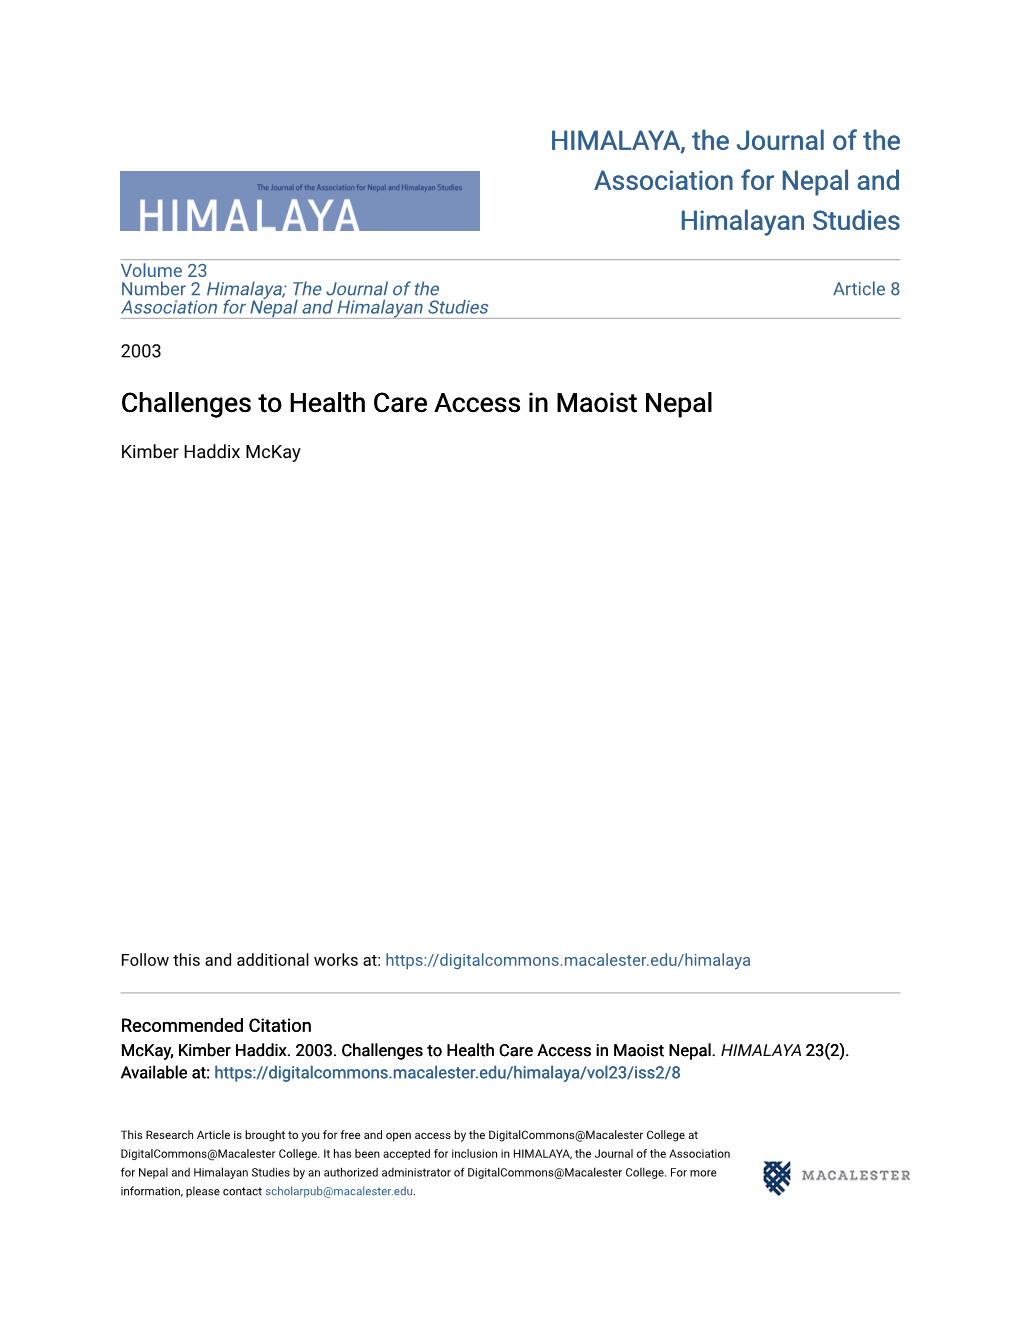 Challenges to Health Care Access in Maoist Nepal